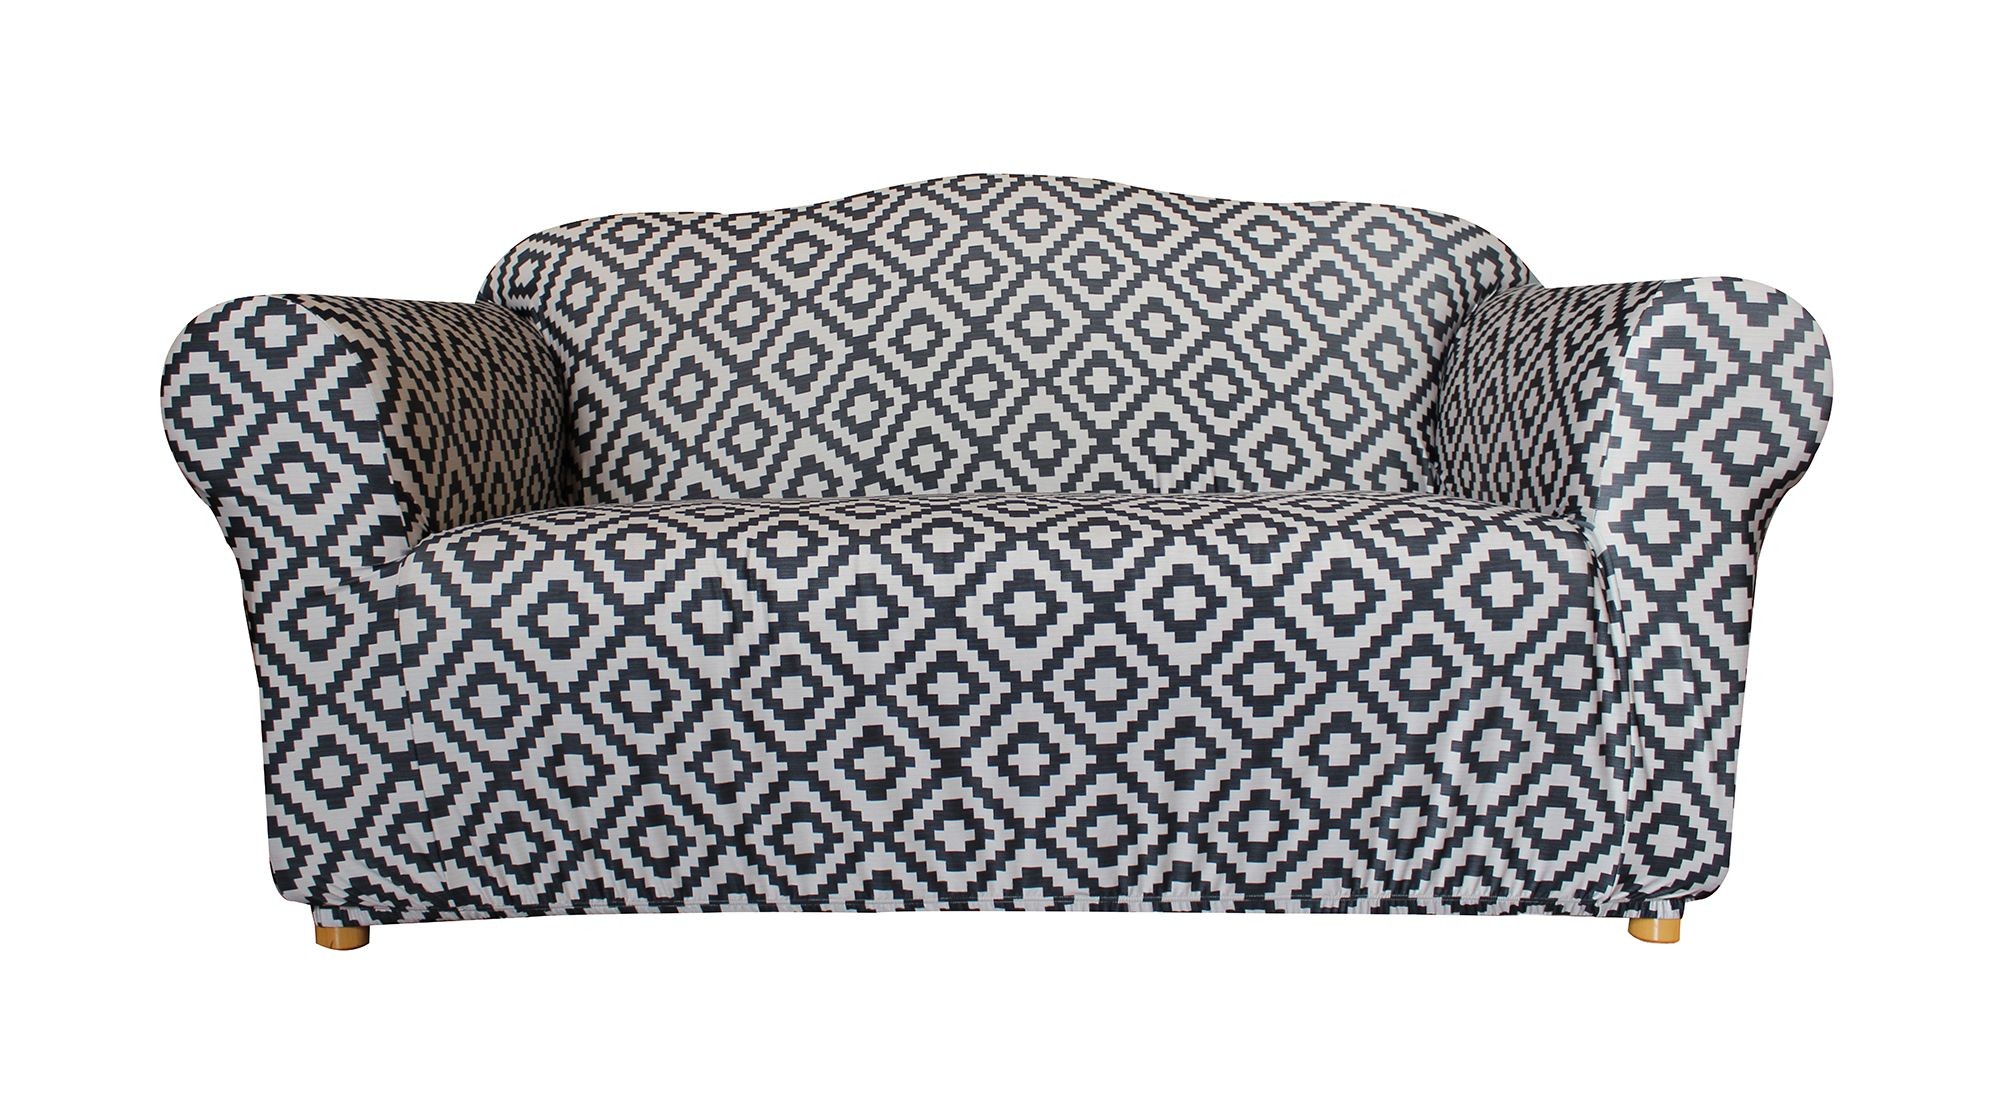 Tribal 2 Seater Couch Cover by Surefit